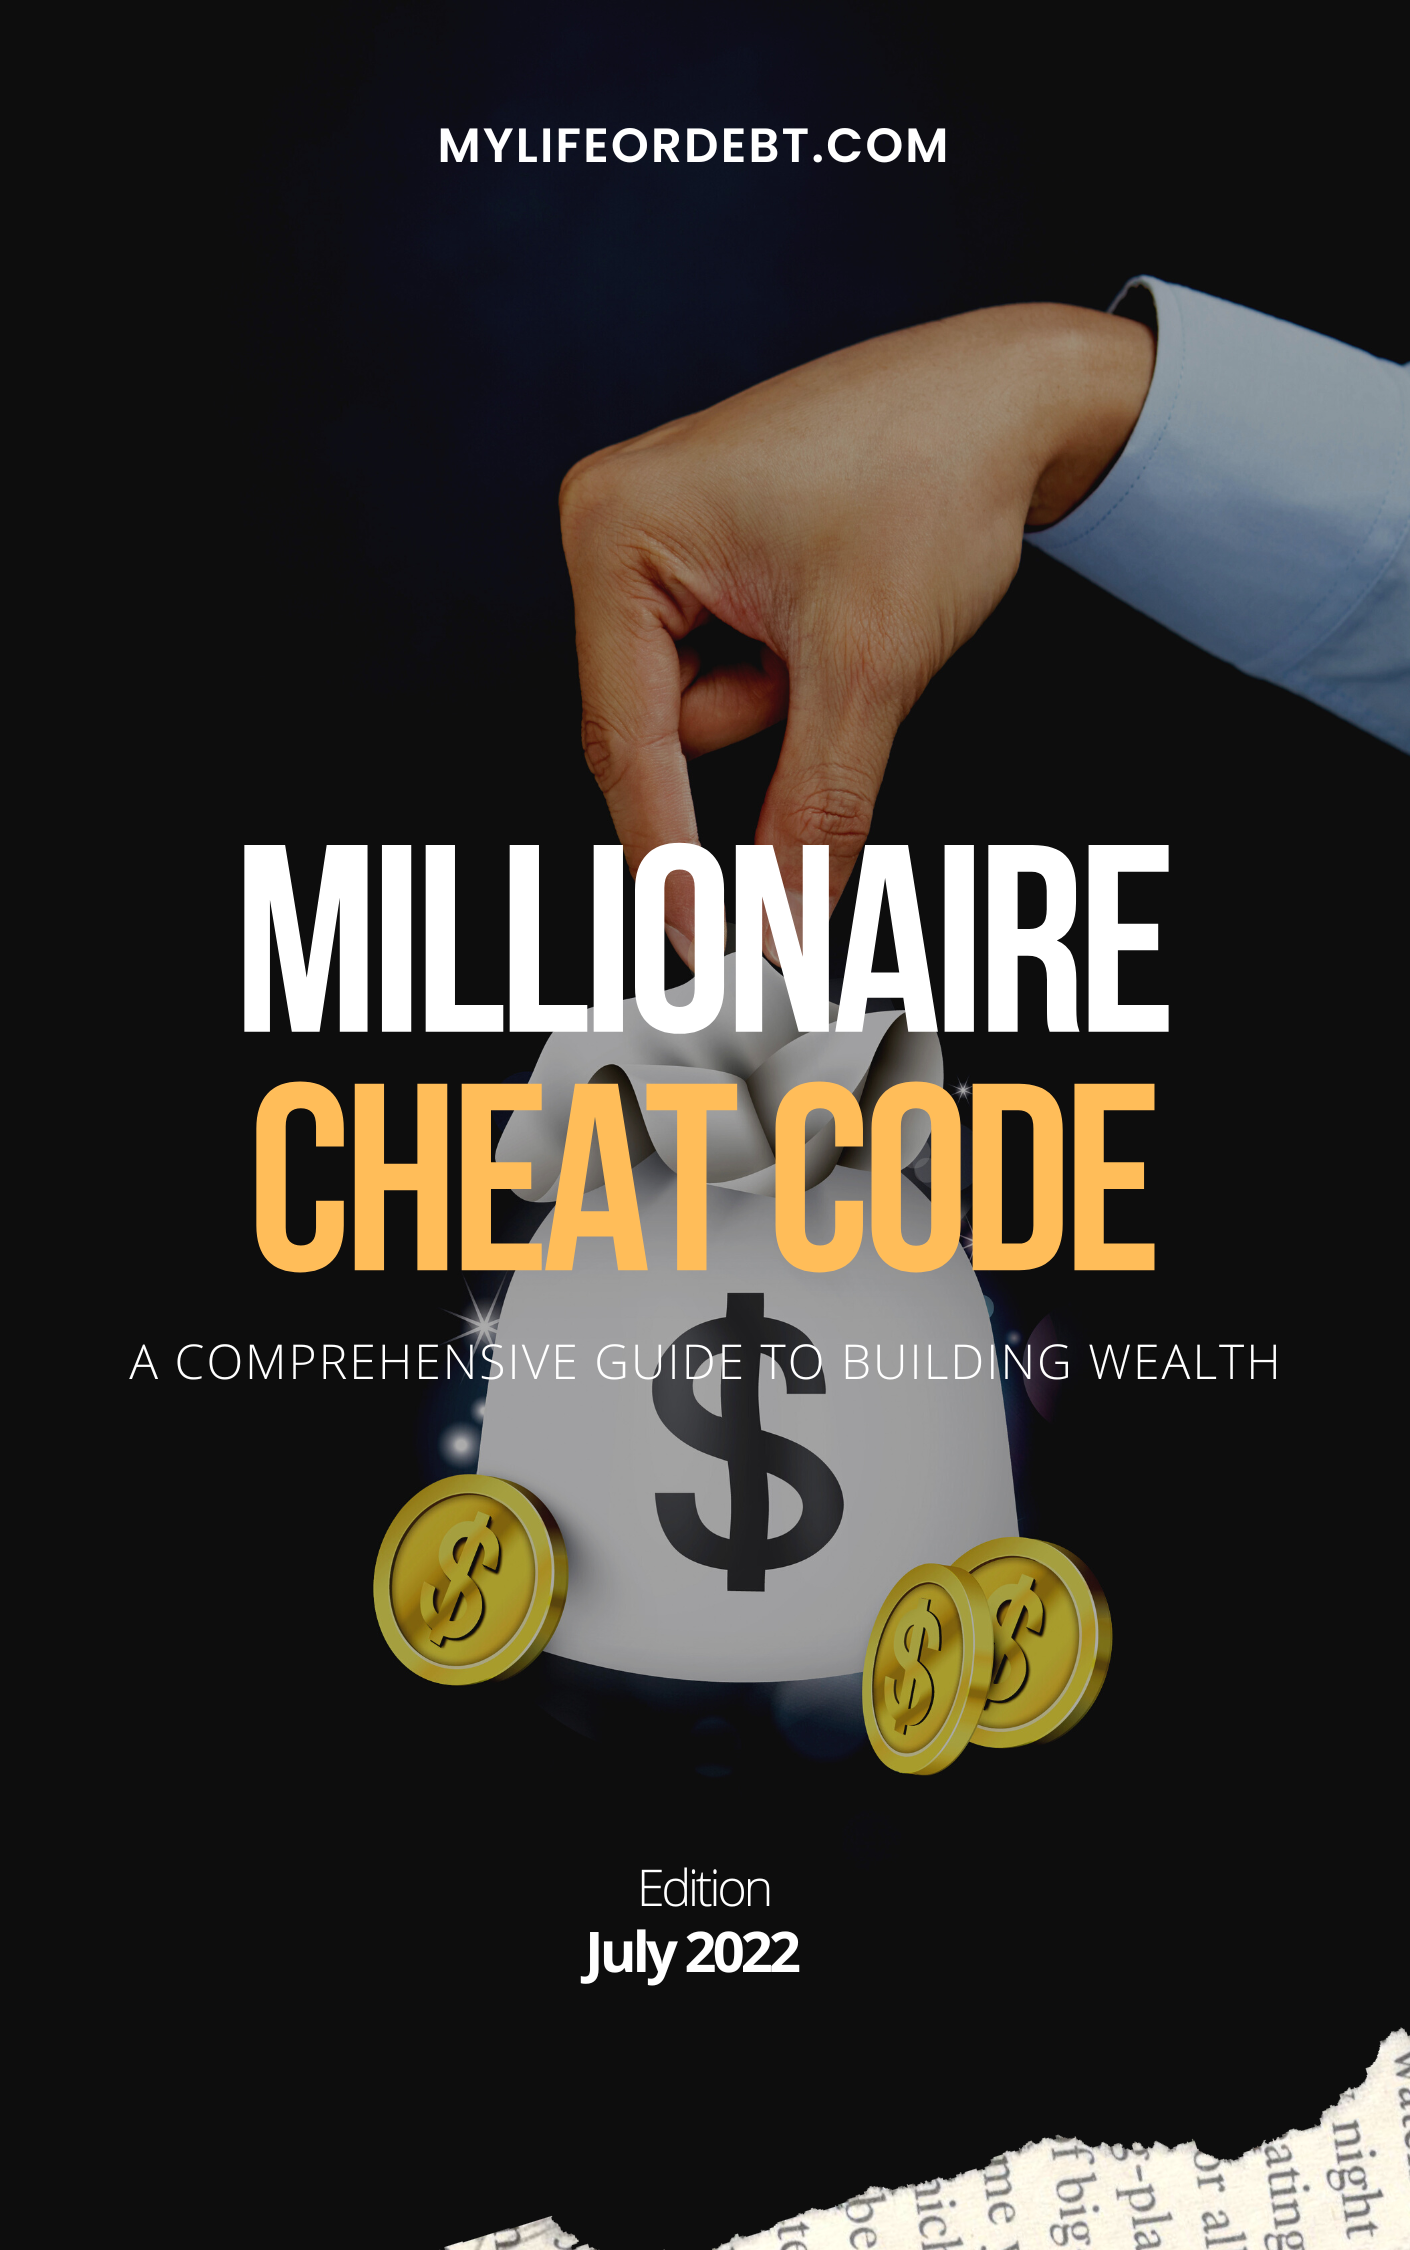 MILLIONAIRE CHEAT CODE: A Comprehensive Guide To Building Wealth